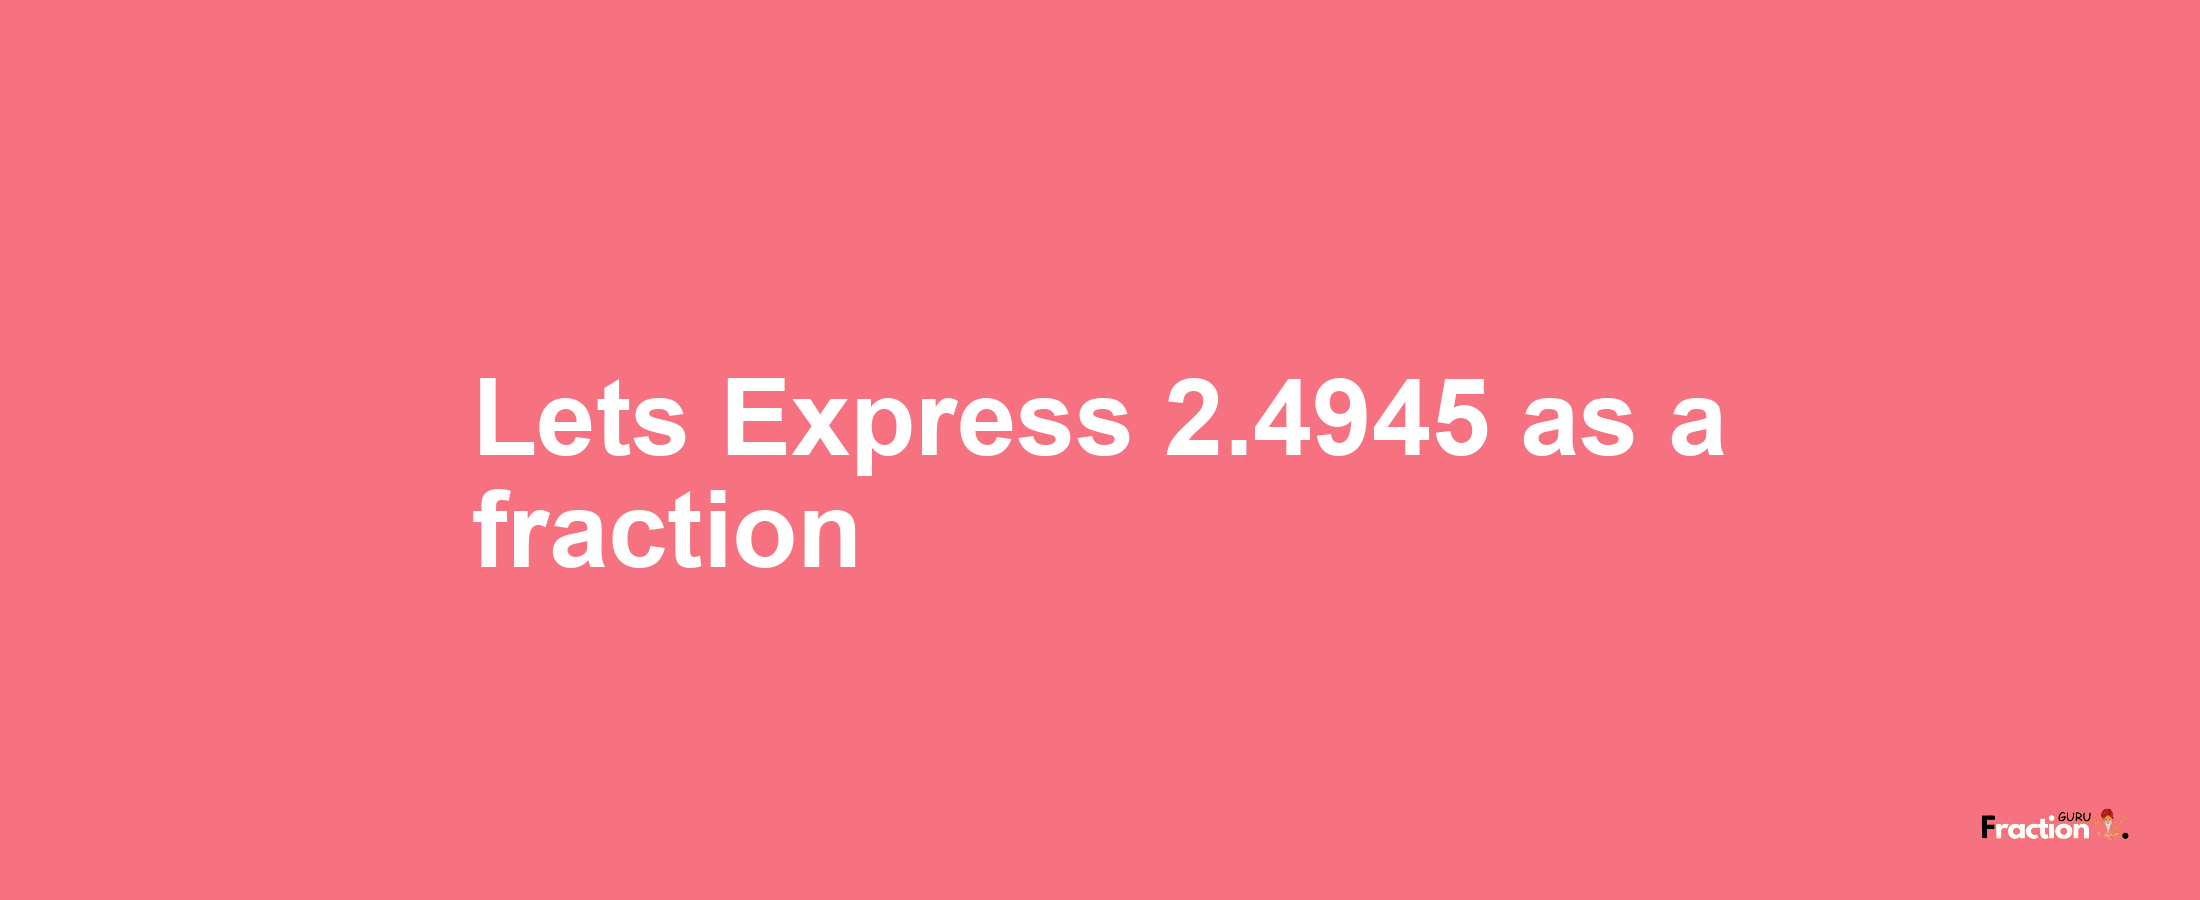 Lets Express 2.4945 as afraction